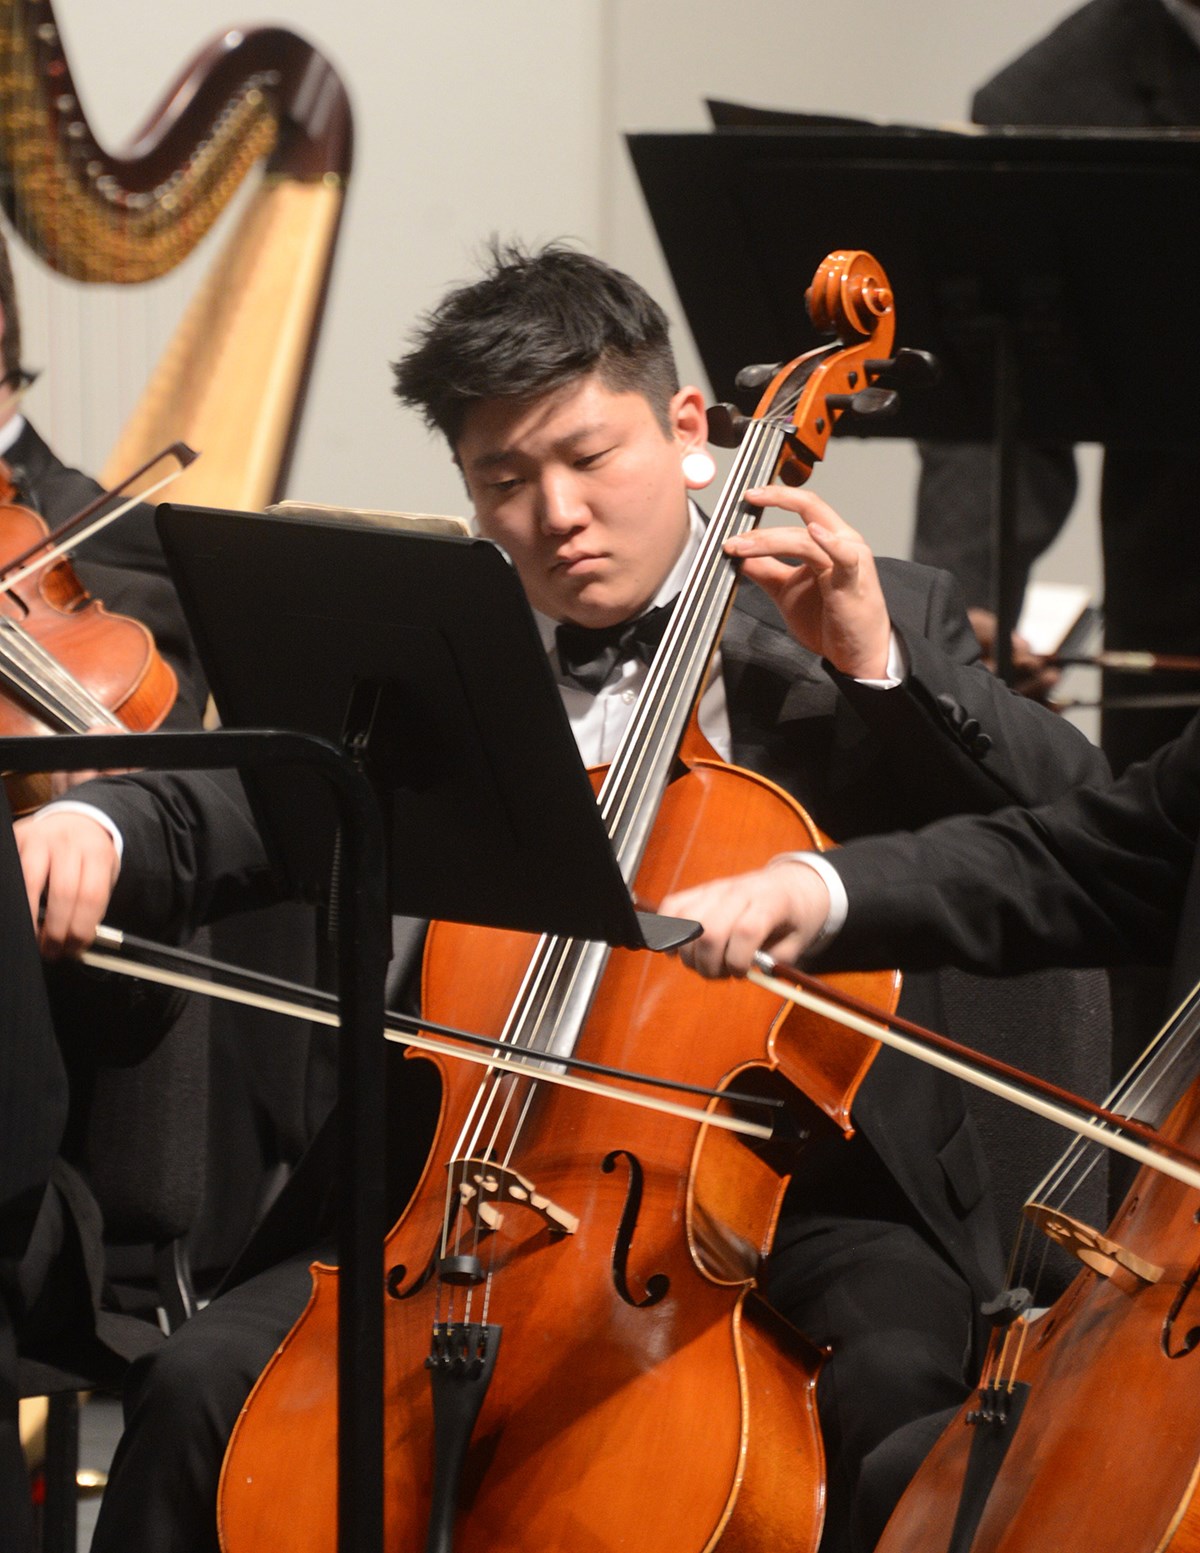 A cellist performs at the University Orchestra's "All You Need is Love!” Valentine's Day concert.